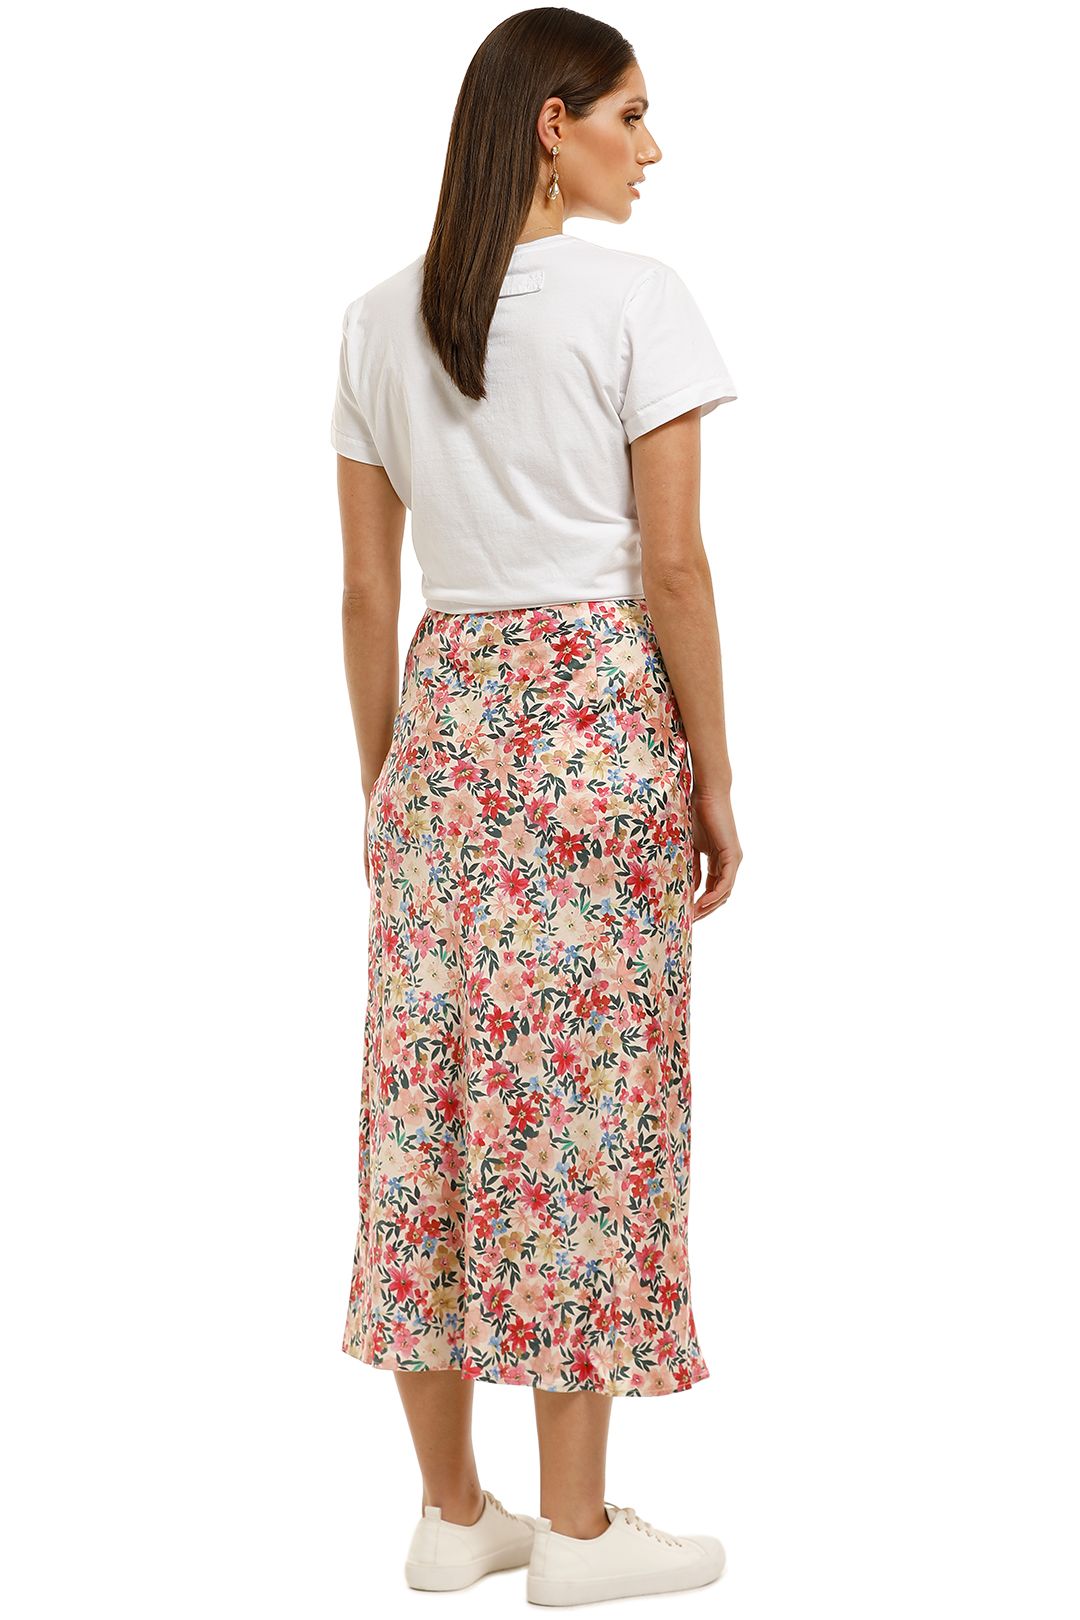 CMEO-Collective-Time-Flew-Skirt-Cream-Garden-Floral-Back